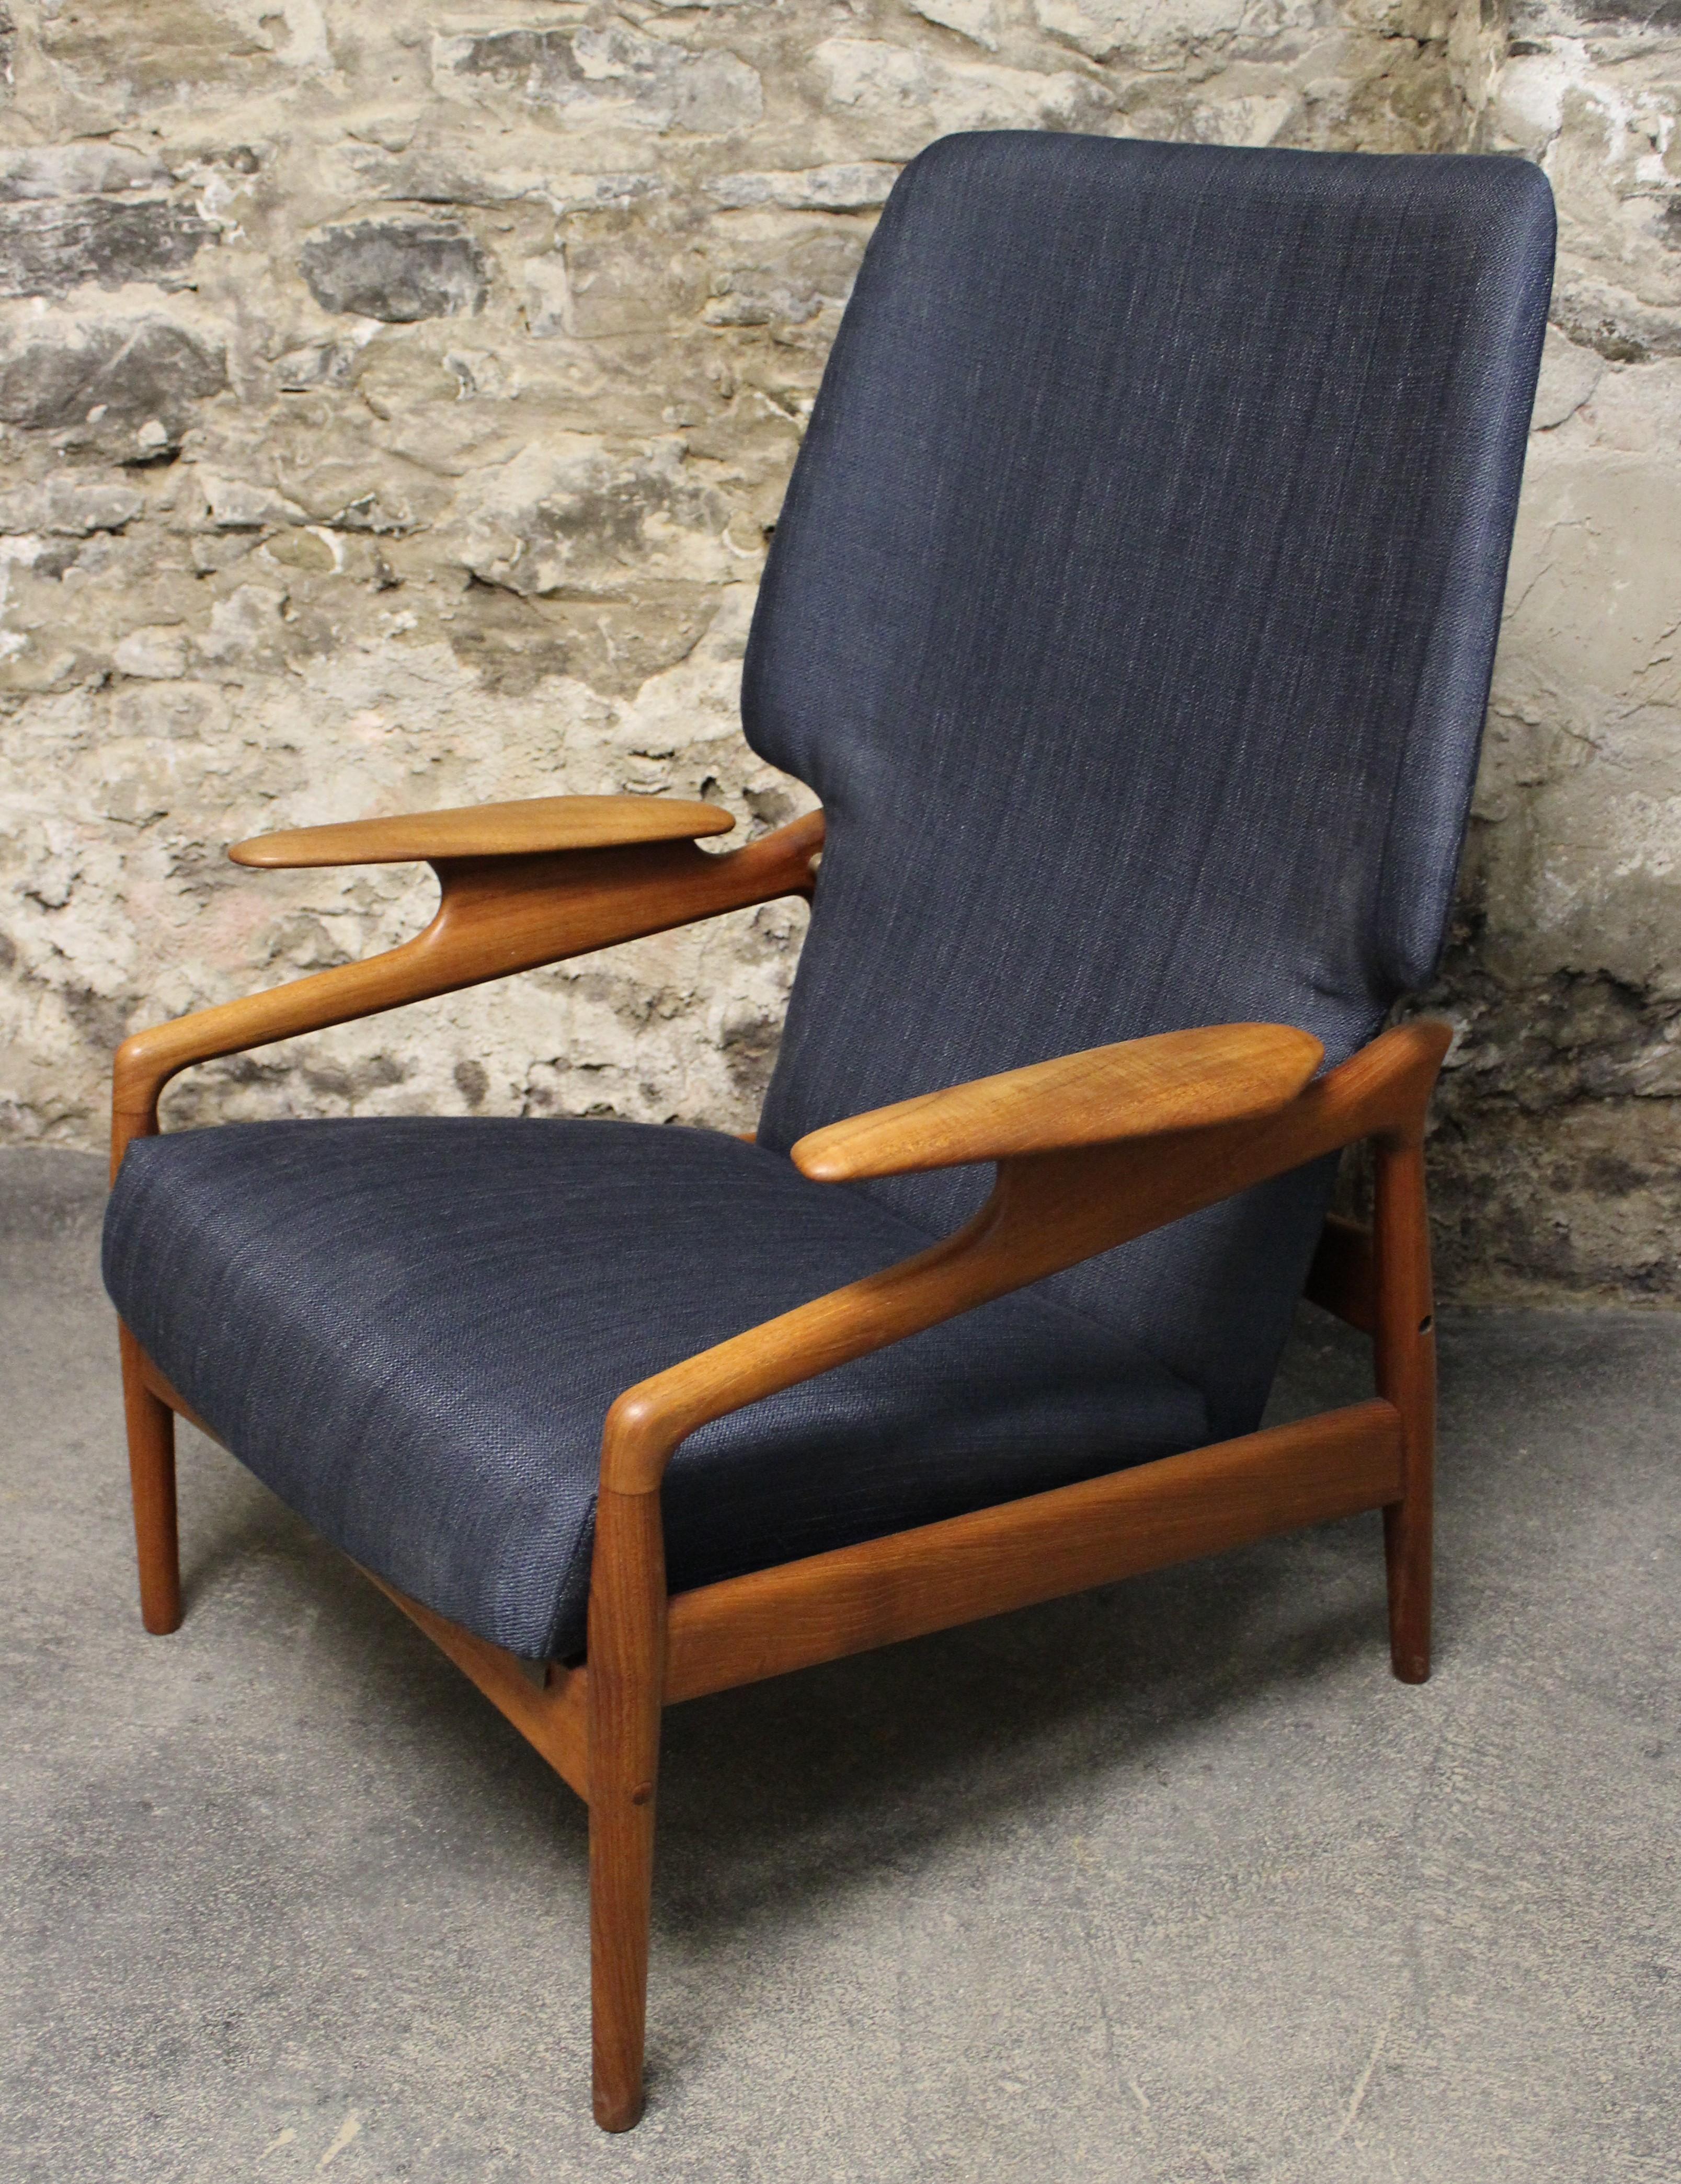 Style meets function with this classic midcentury design by John Bone. Reupholstered in a blue fabric this timeless lounge chair will look good where ever it is placed in a room. This reclining chair has 3 positions it can be set to, please see in